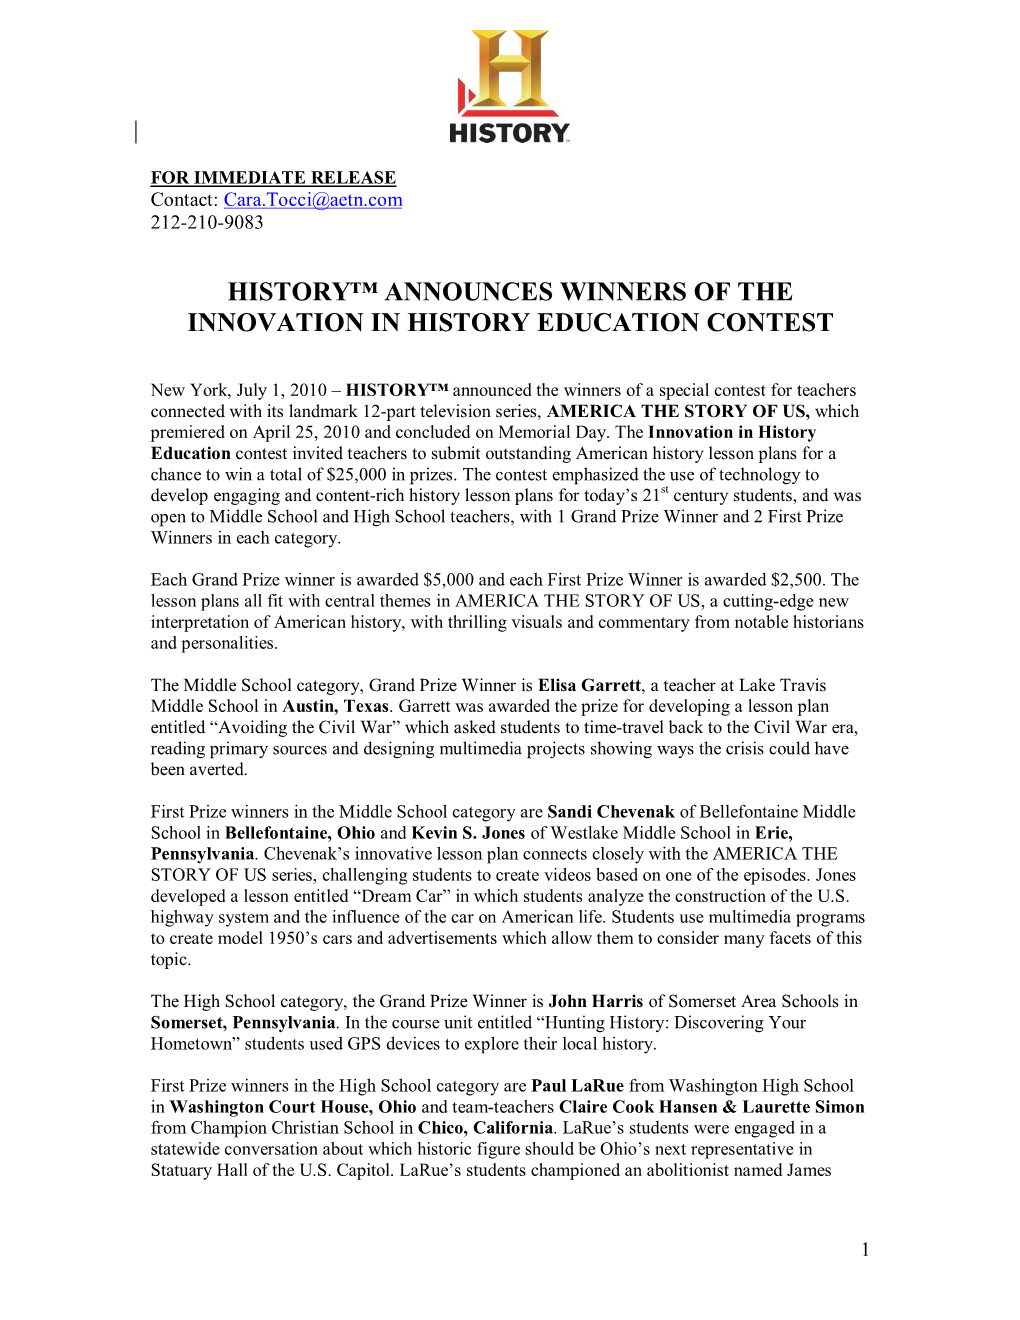 History™ Announces Winners of the Innovation in History Education Contest